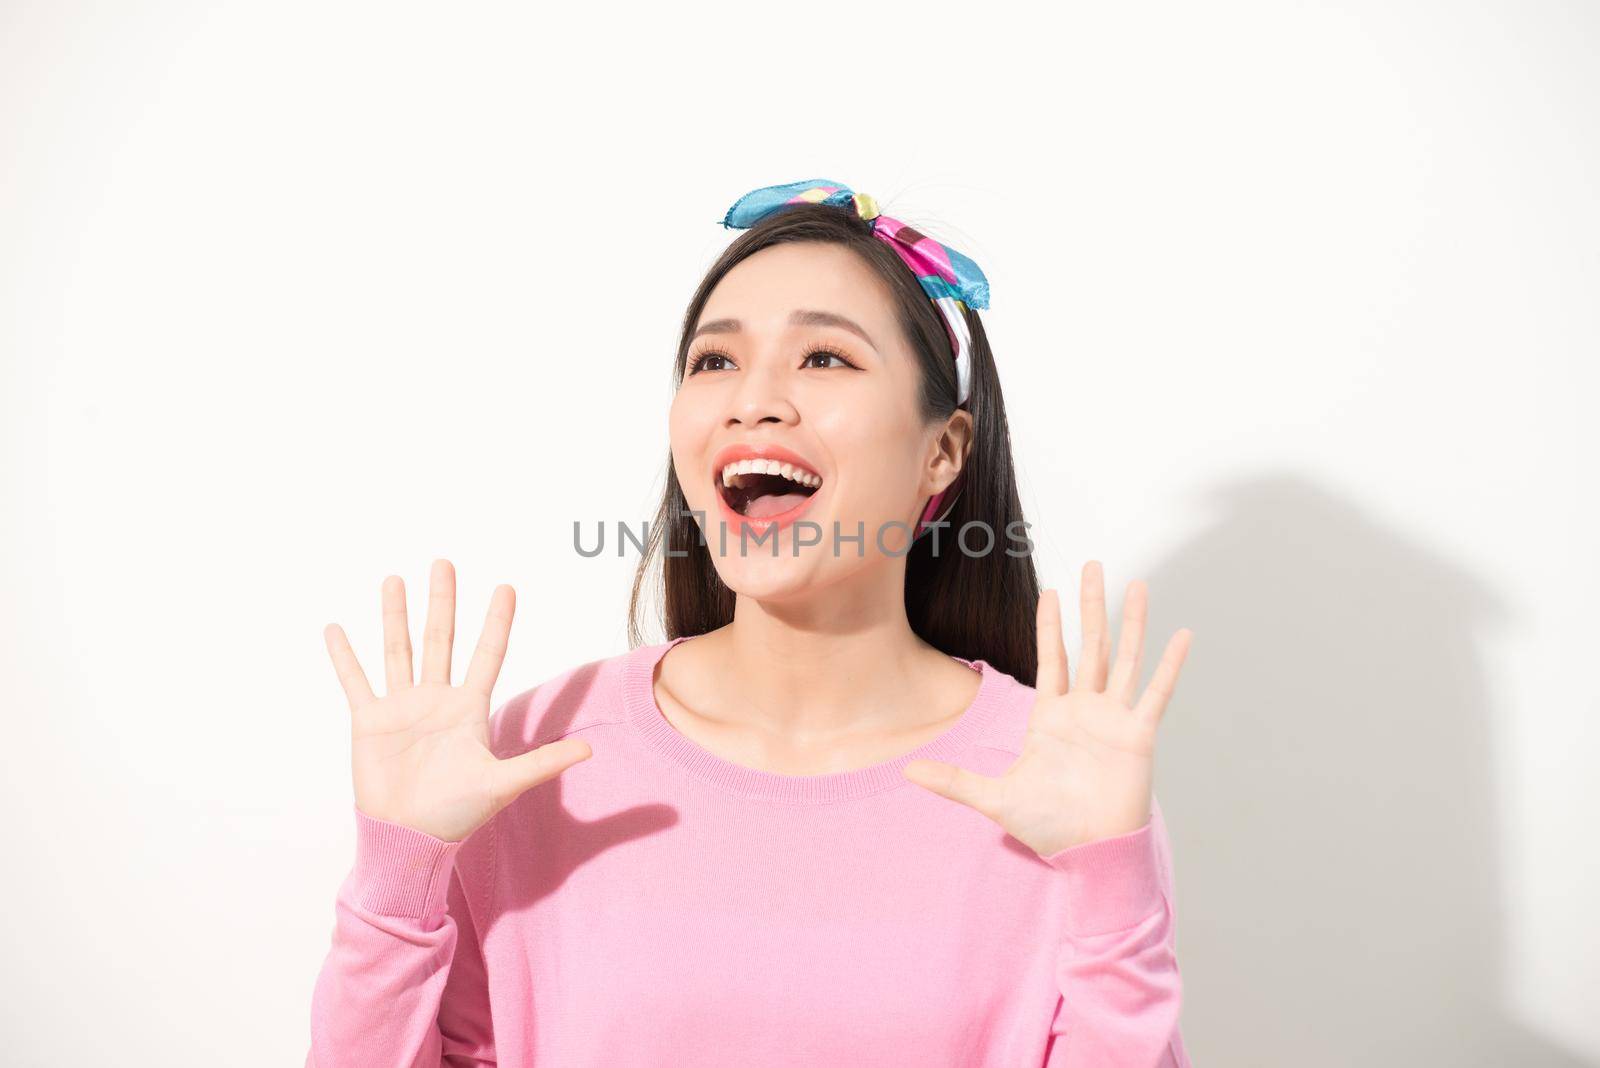 excited happy girl woman expression, amazed woman, surprised asian woman looking, casual girl portrait studio white background isolated, excited happy people concept, beautiful girl asian woman model